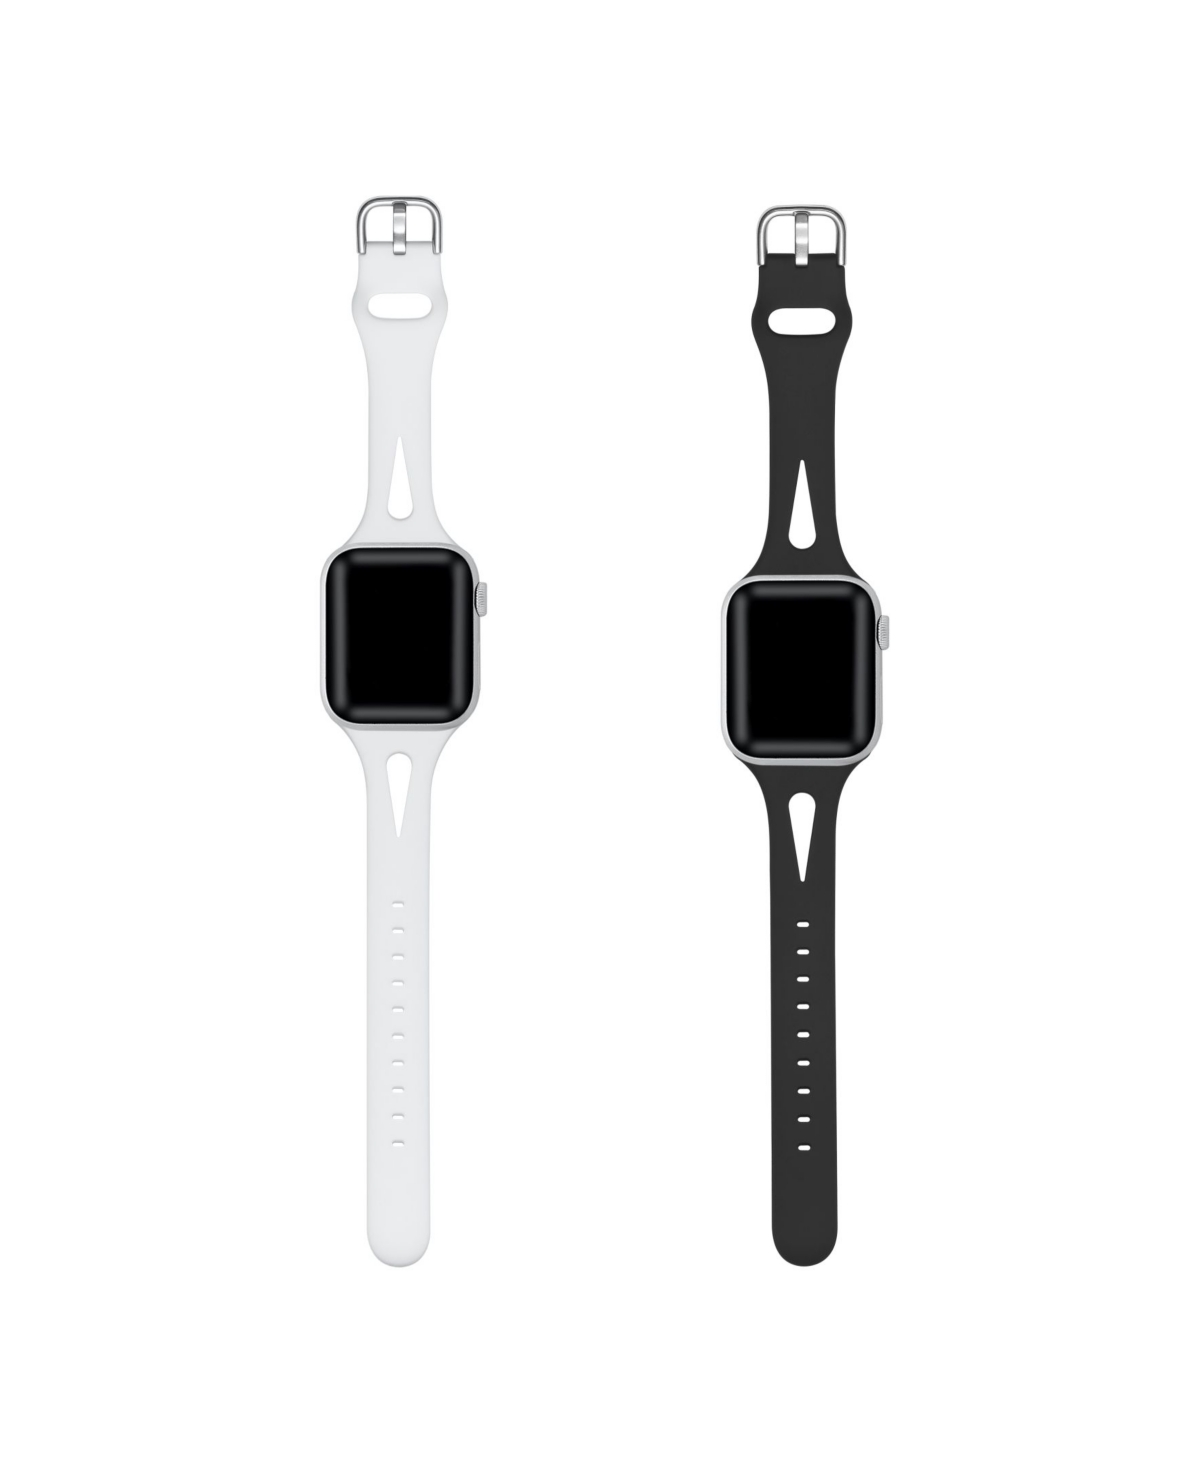 Alex 2-Pack White and Black Silicone Bands for Apple Watch, 42mm-44mm - White, Black